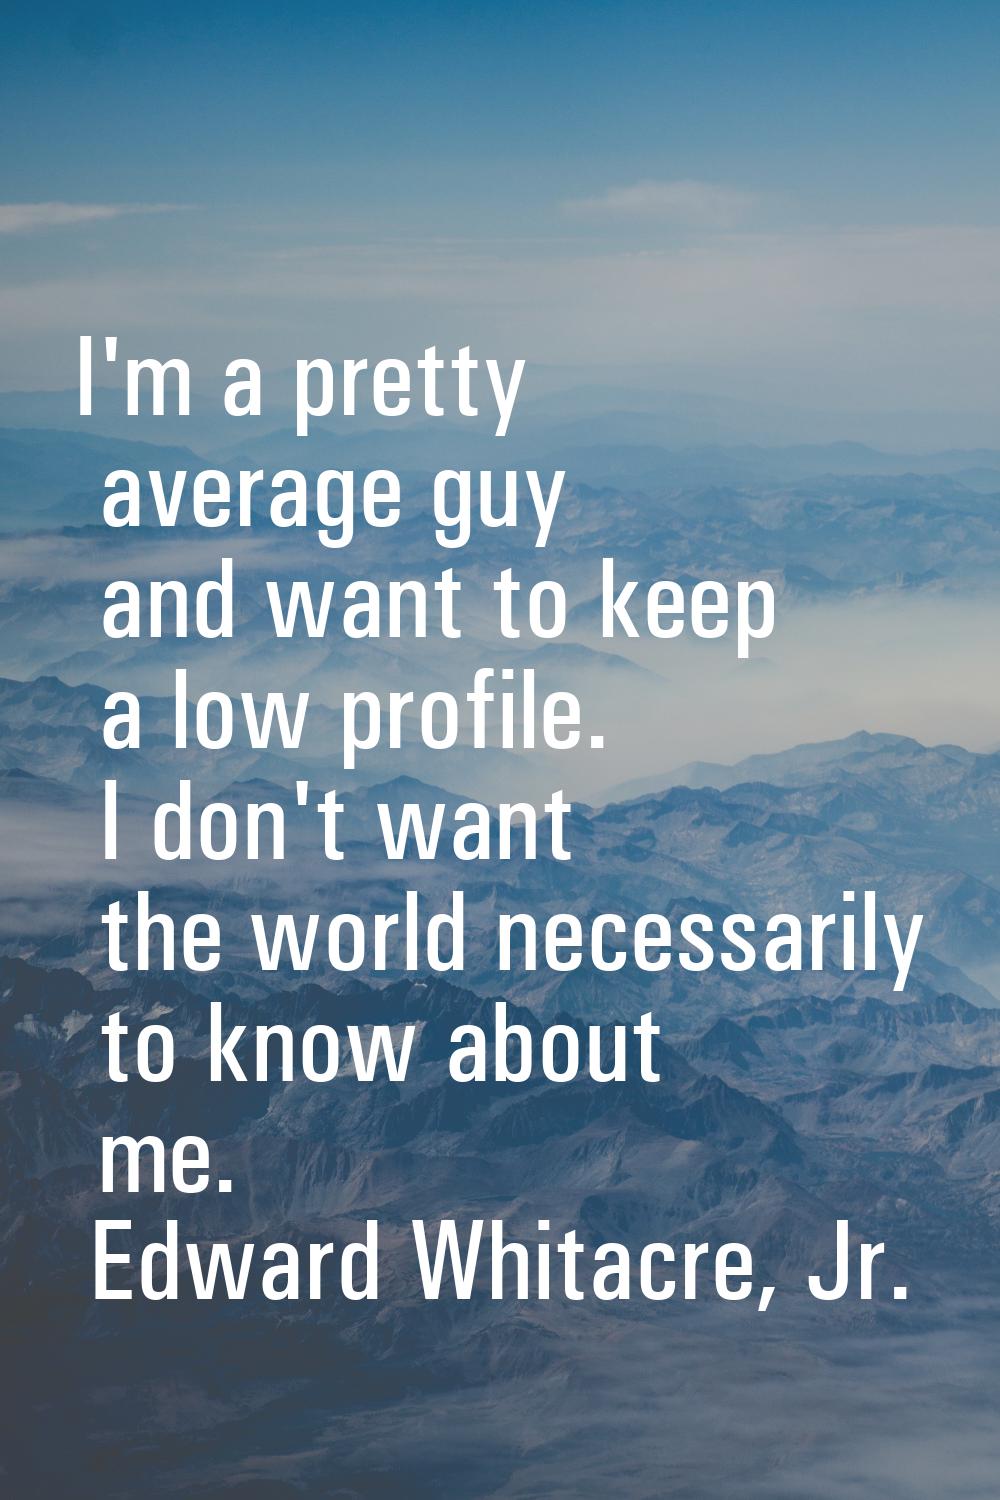 I'm a pretty average guy and want to keep a low profile. I don't want the world necessarily to know